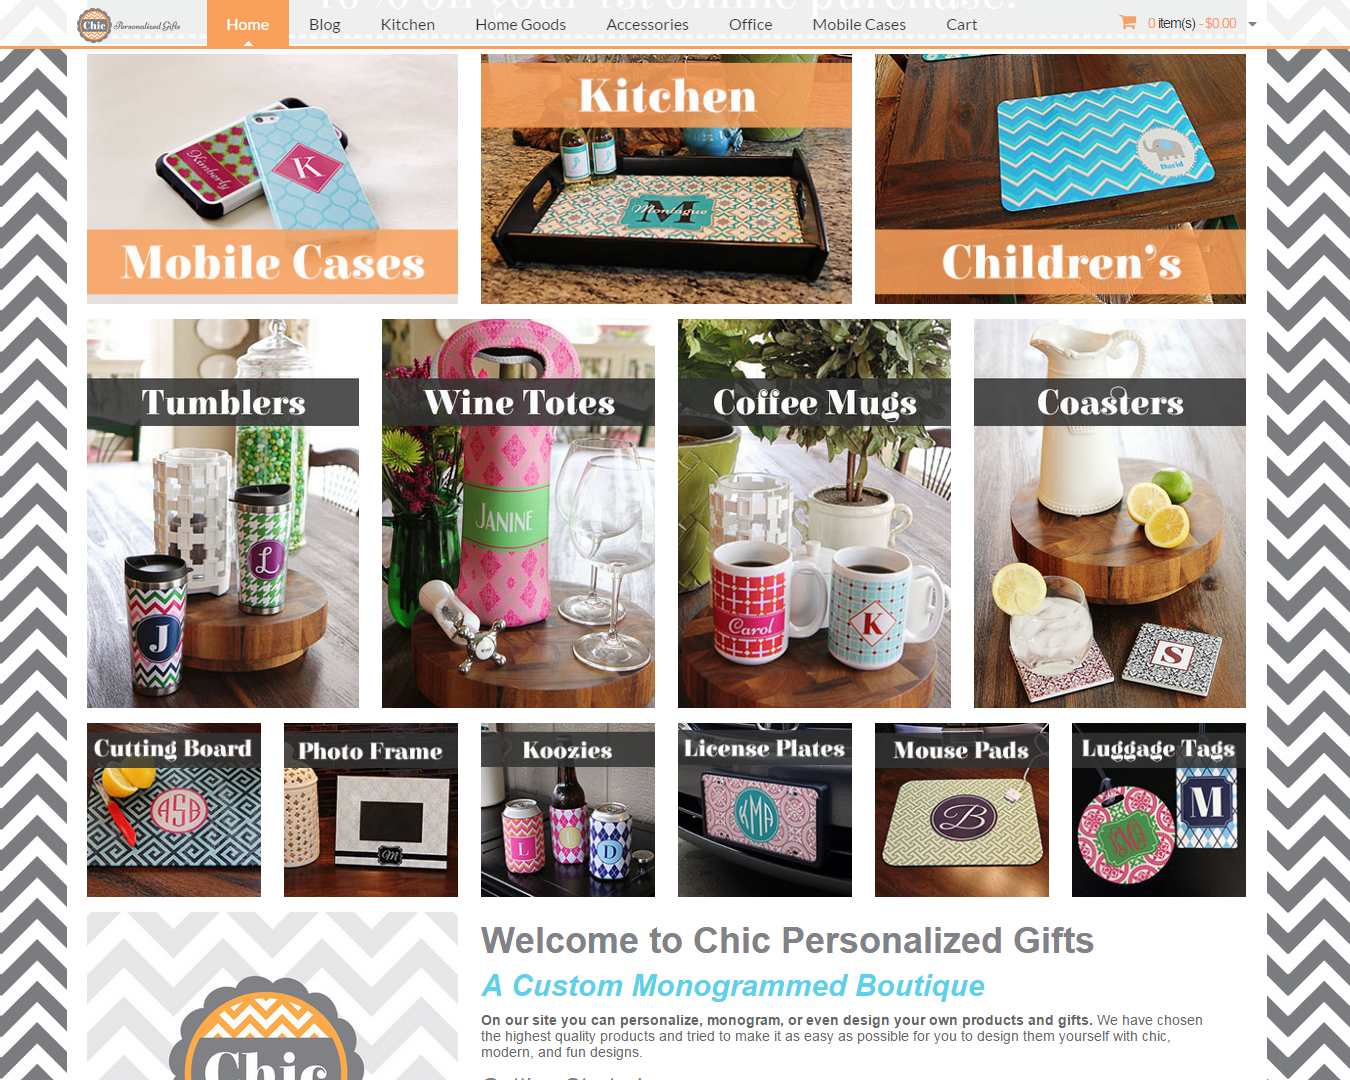 Chic Personalized Gifts